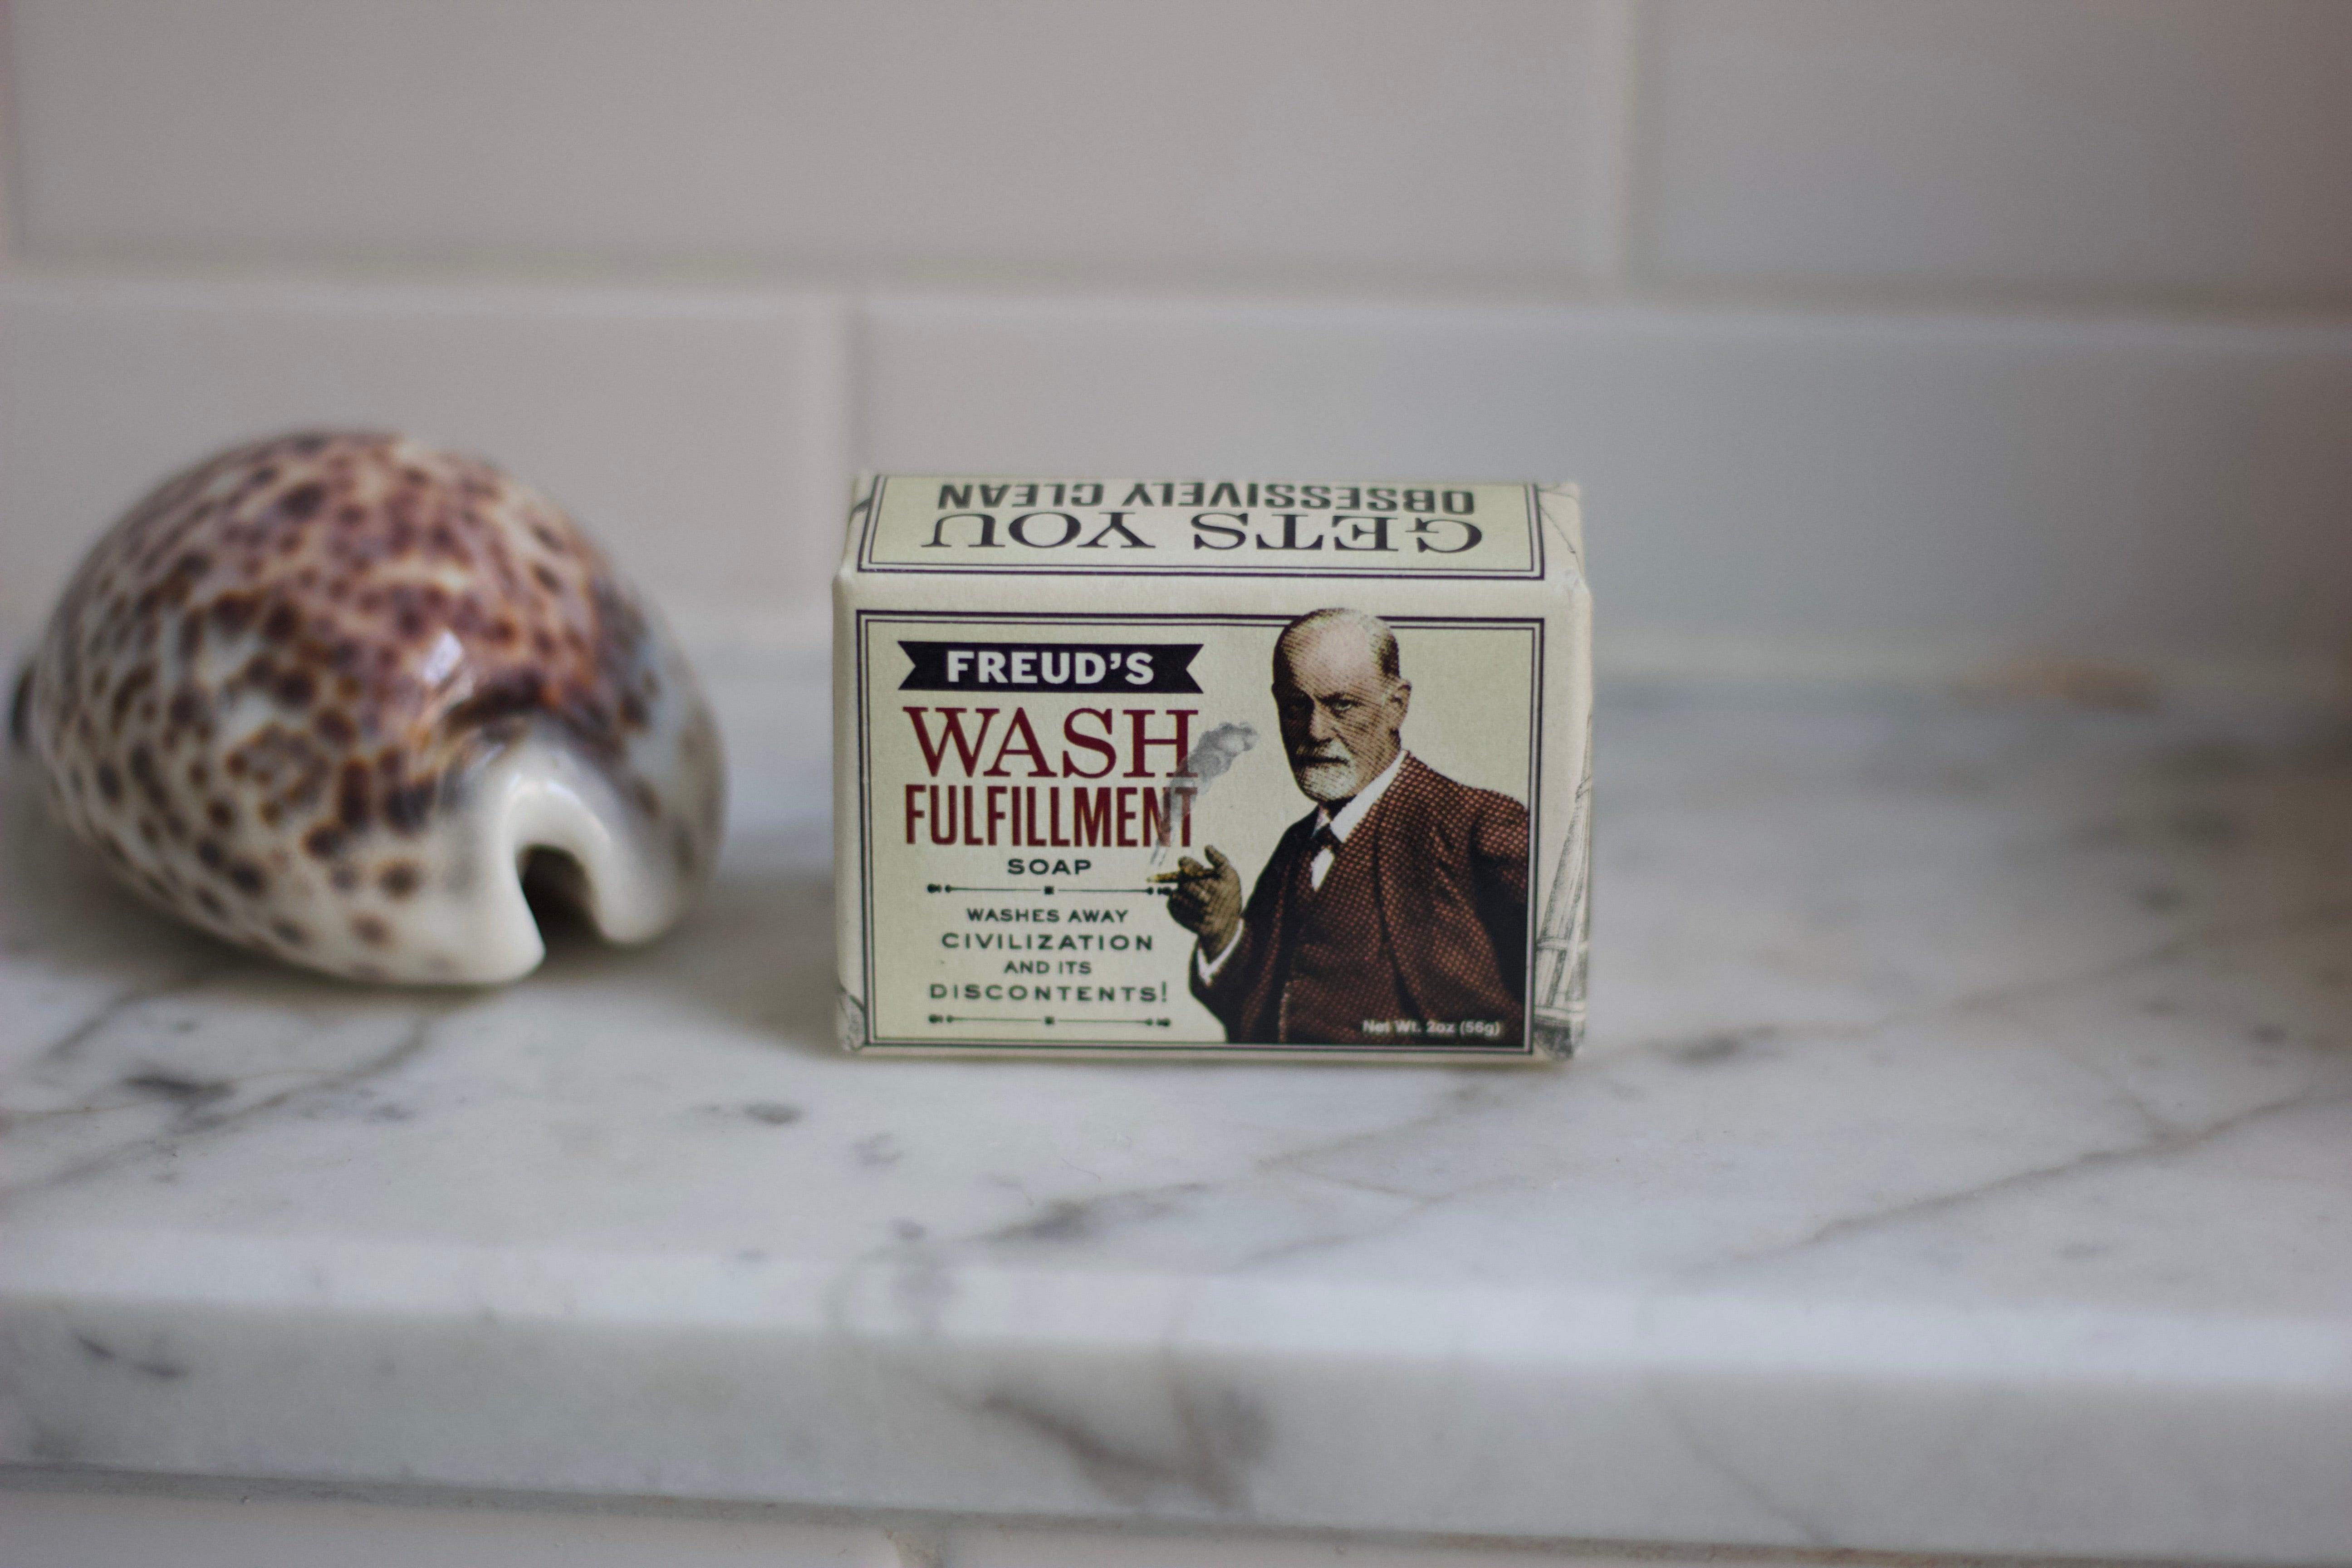 Product photo of Freud's Wash Fulfillment Soap, a novelty gift manufactured by The Unemployed Philosophers Guild.